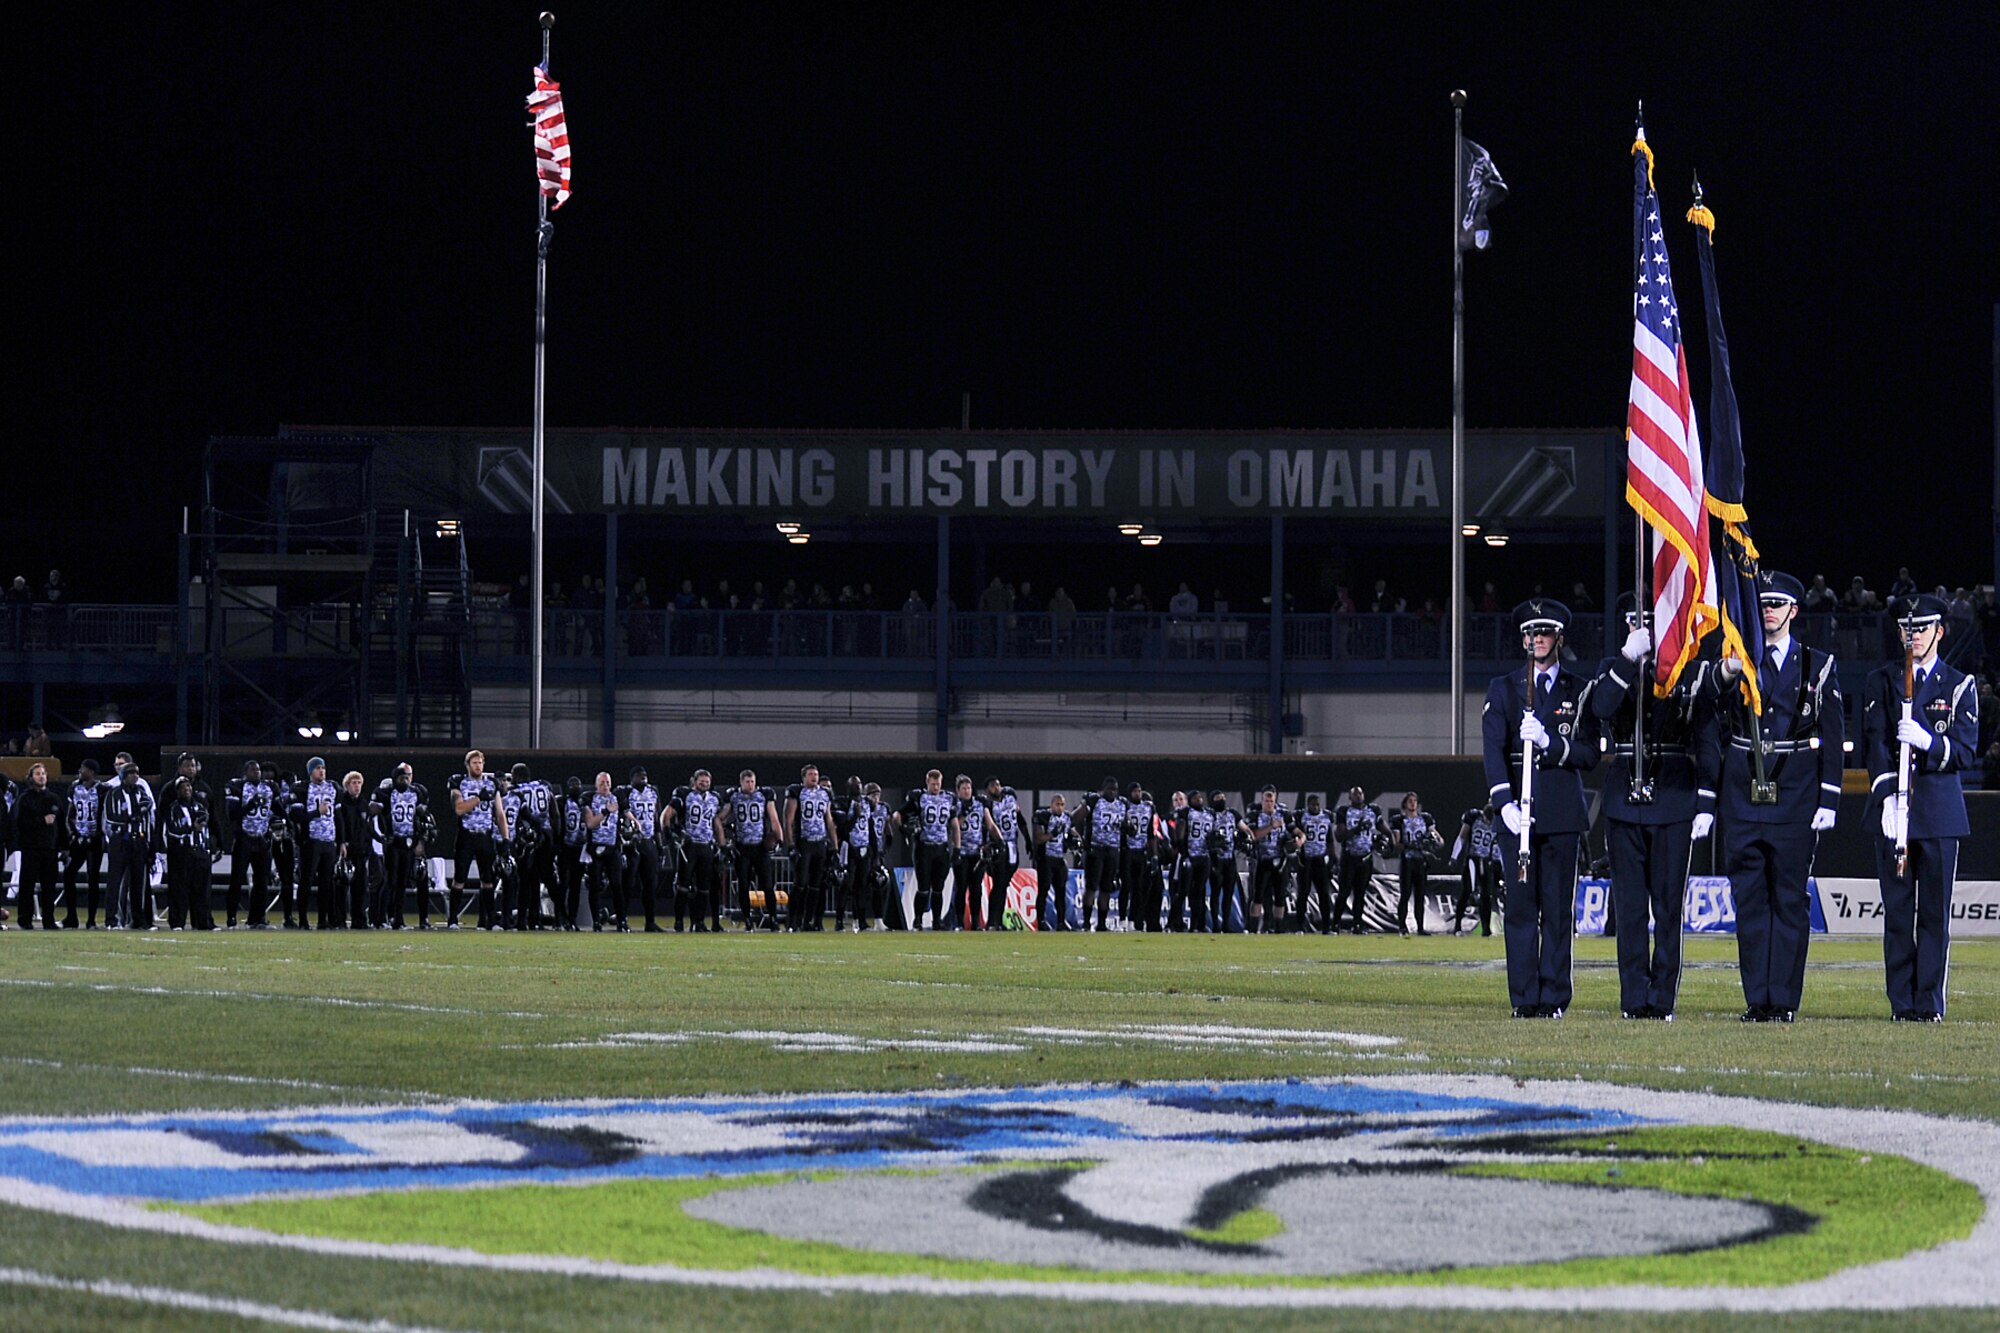 OFFUTT AIR FORCE BASE, Neb. - The 55th Wing Base Honor Guard posts the colors during the Omaha Nighthawks military appreciation game at the Rosenblatt Stadium Nov. 19. Military members from all branches were celebrated at the game, which ended with a Florida Tuskers win 27 to 10. U.S. Air Force Photo by Charles Haymond (Released)